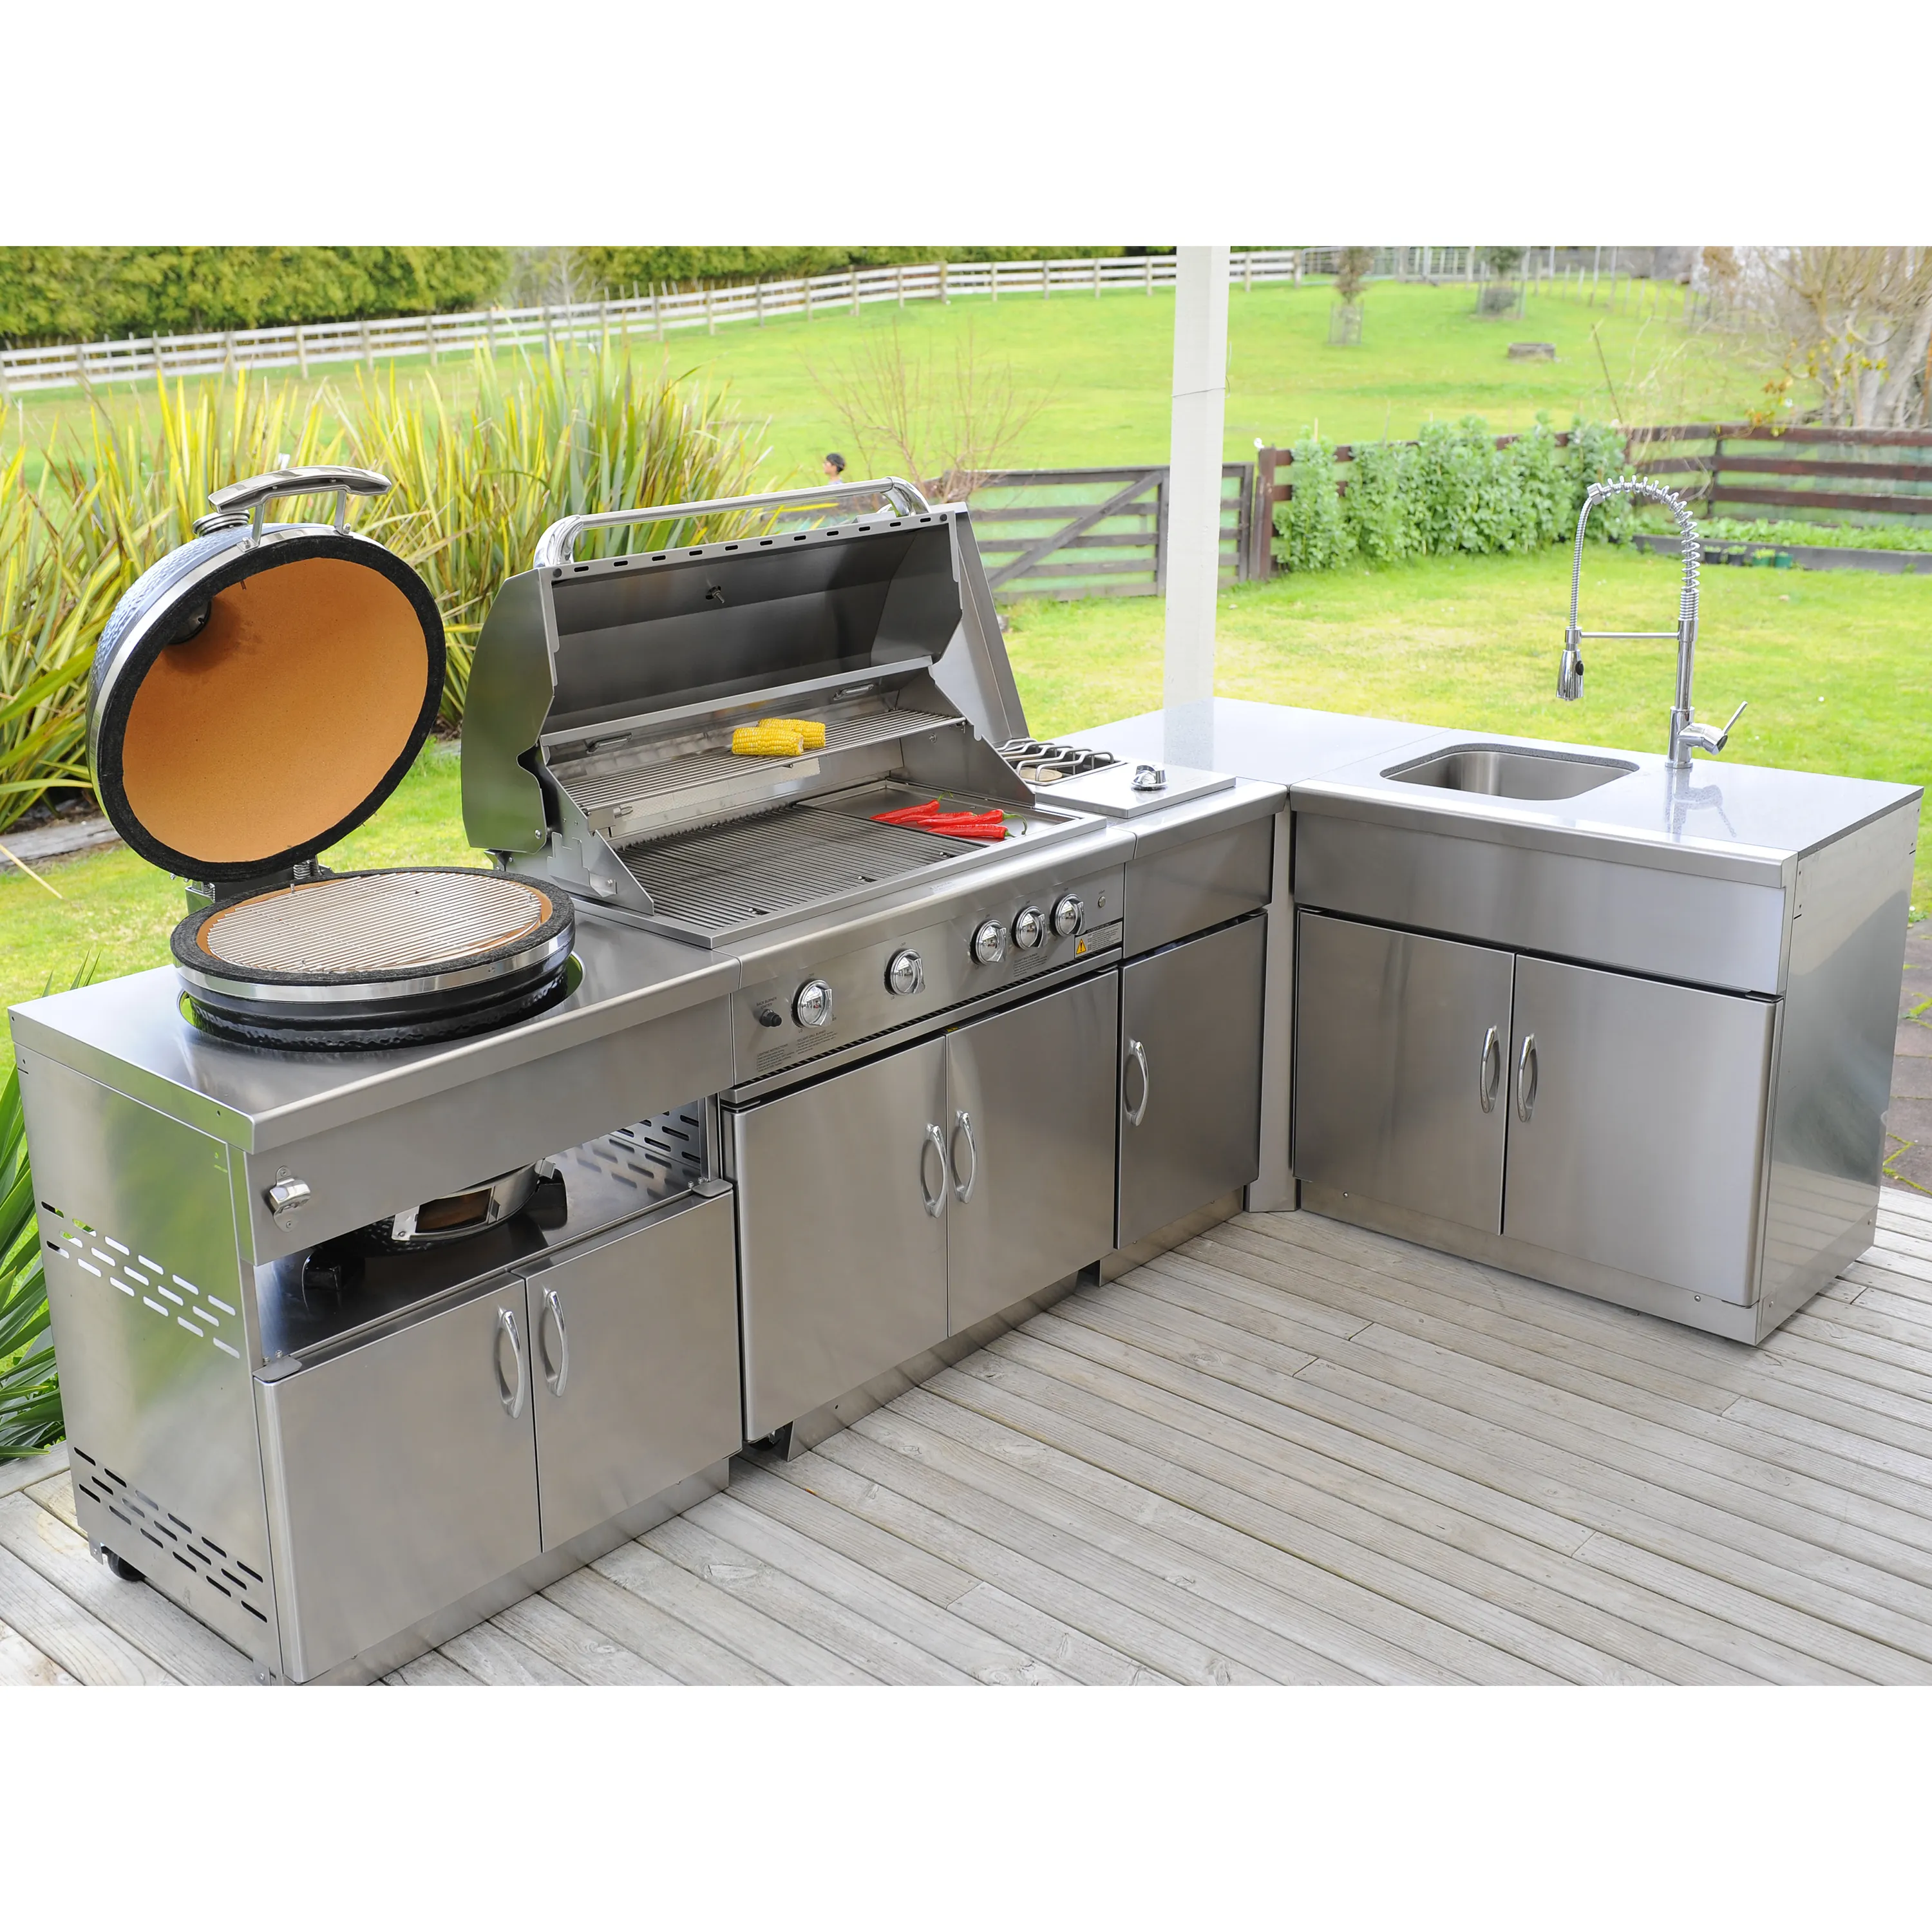 Large Outdoor Stainless Steel Commercial Gas Grill Combined Rotating BBQ Grill Outdoor Kitchen